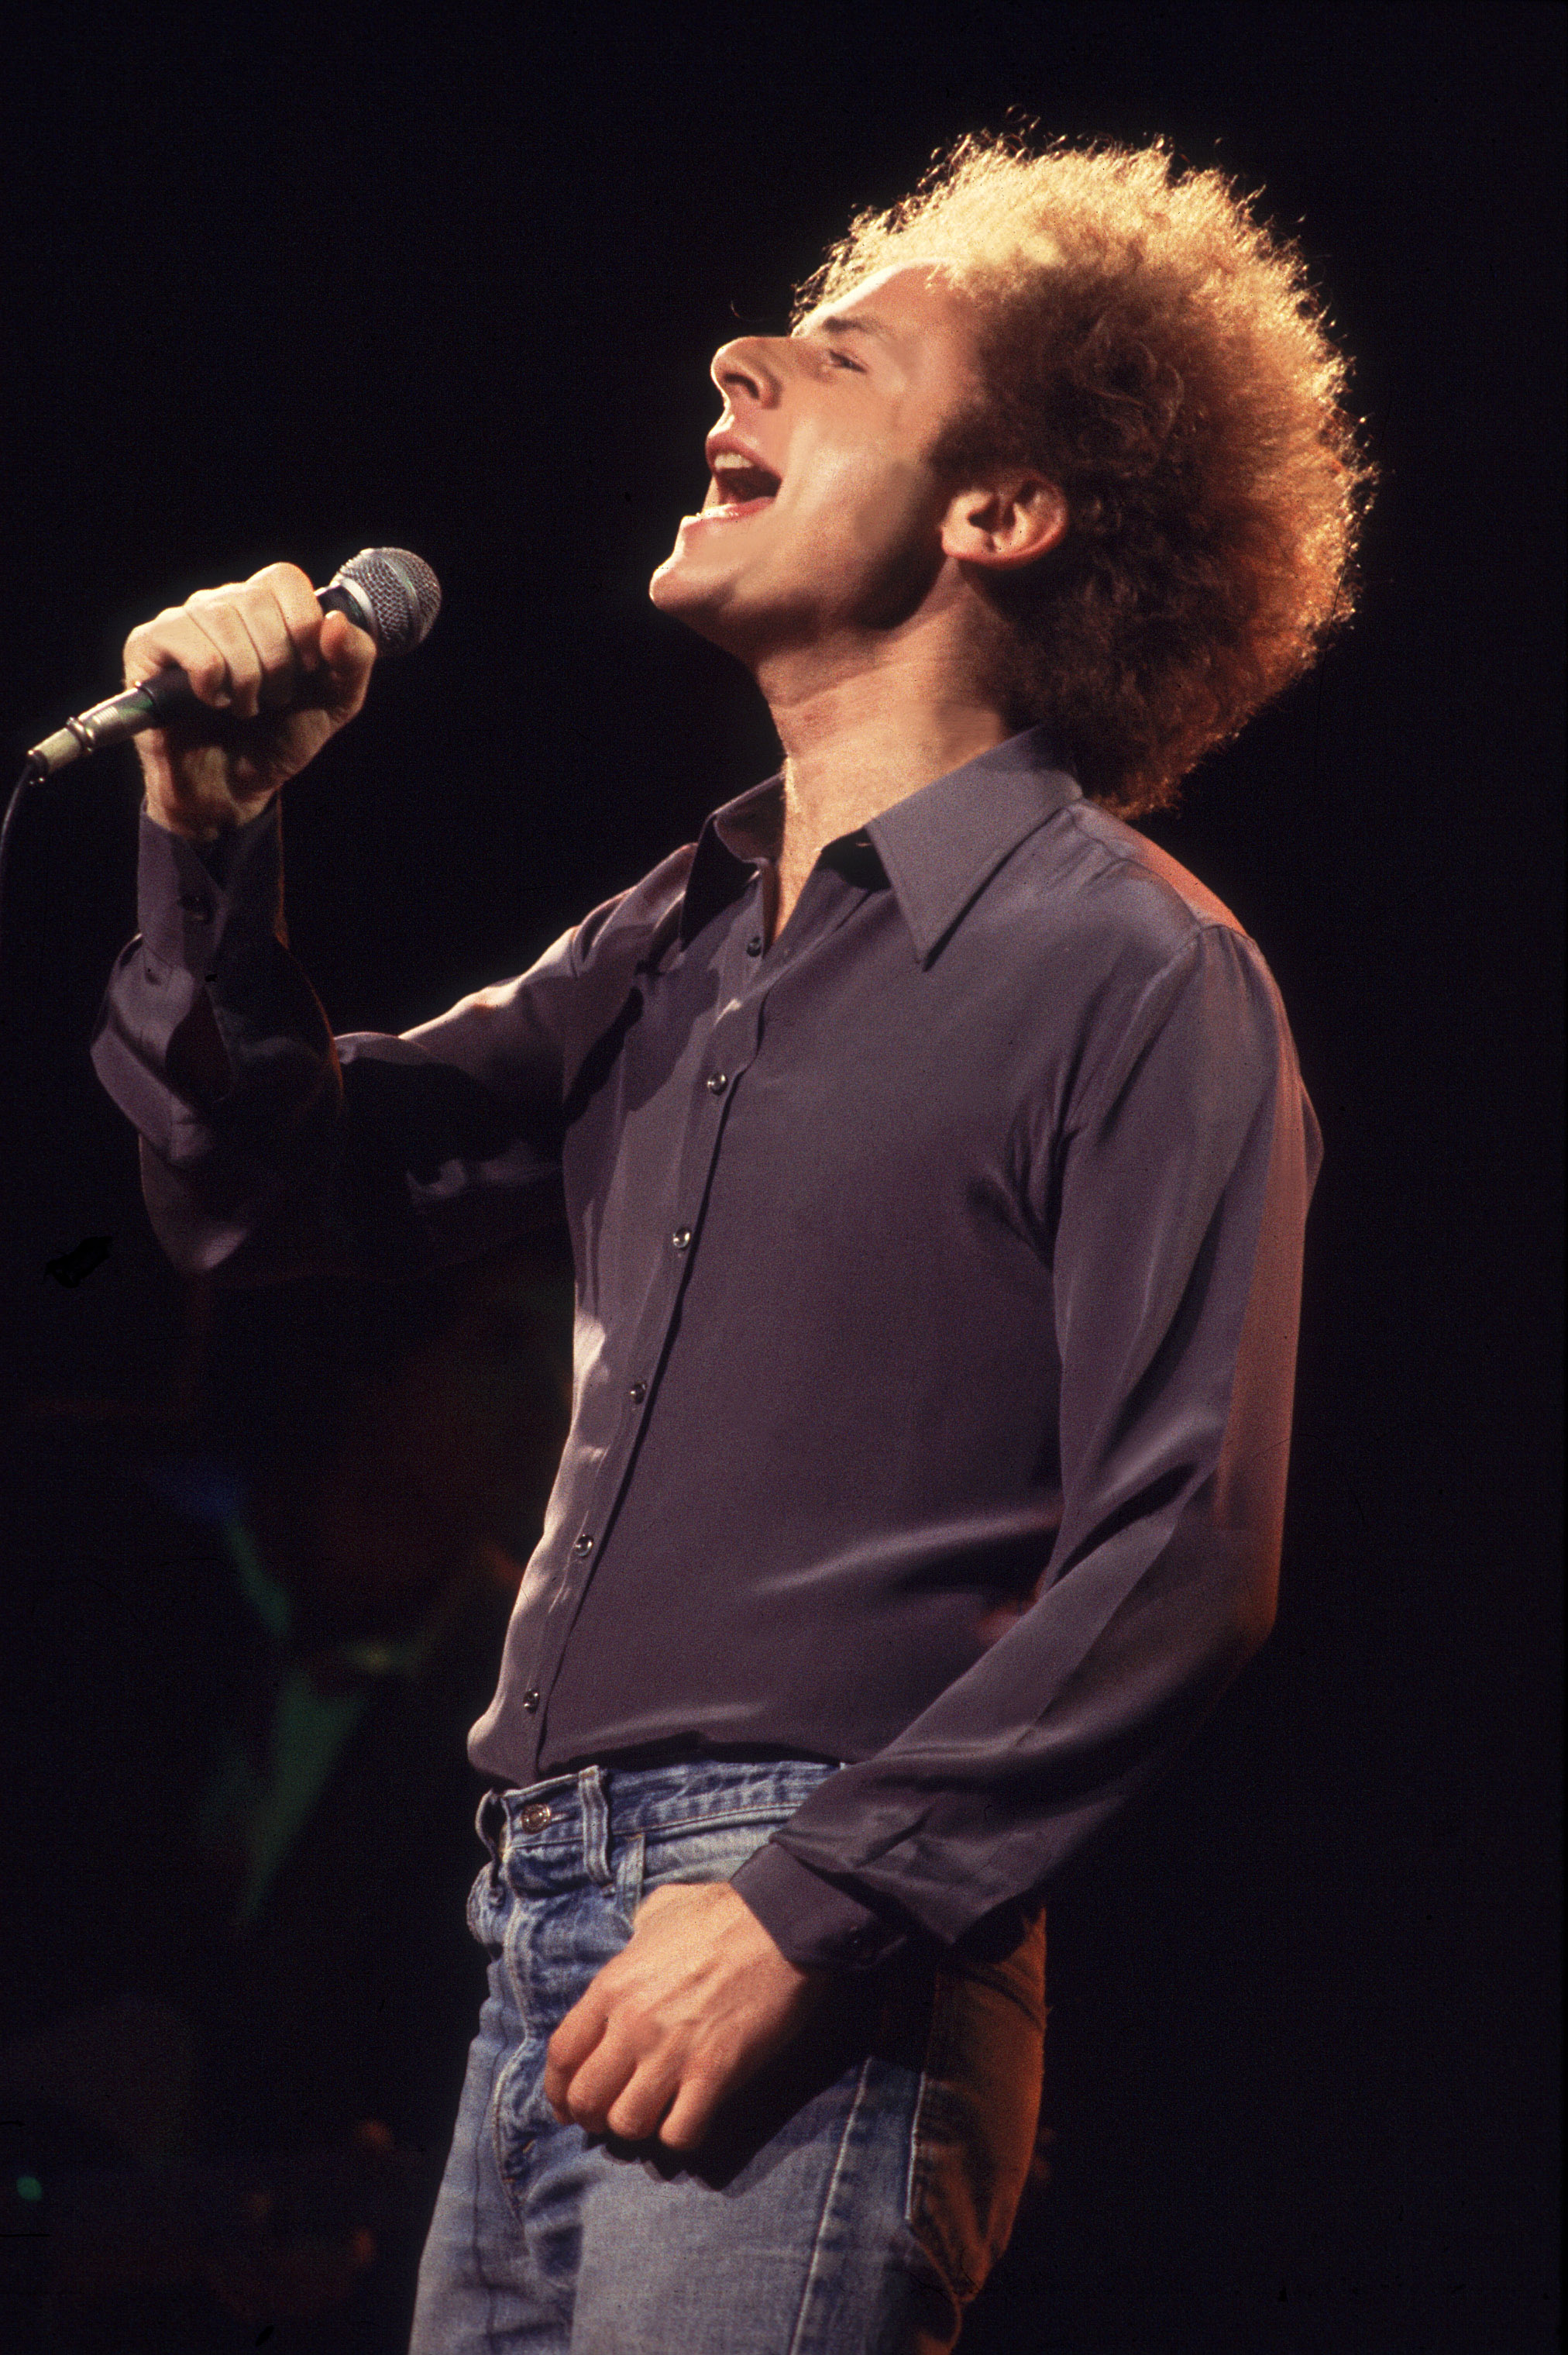 Art Garfunkel in Chicago, Ilinois on April 1, 1978. | Source: Getty Images